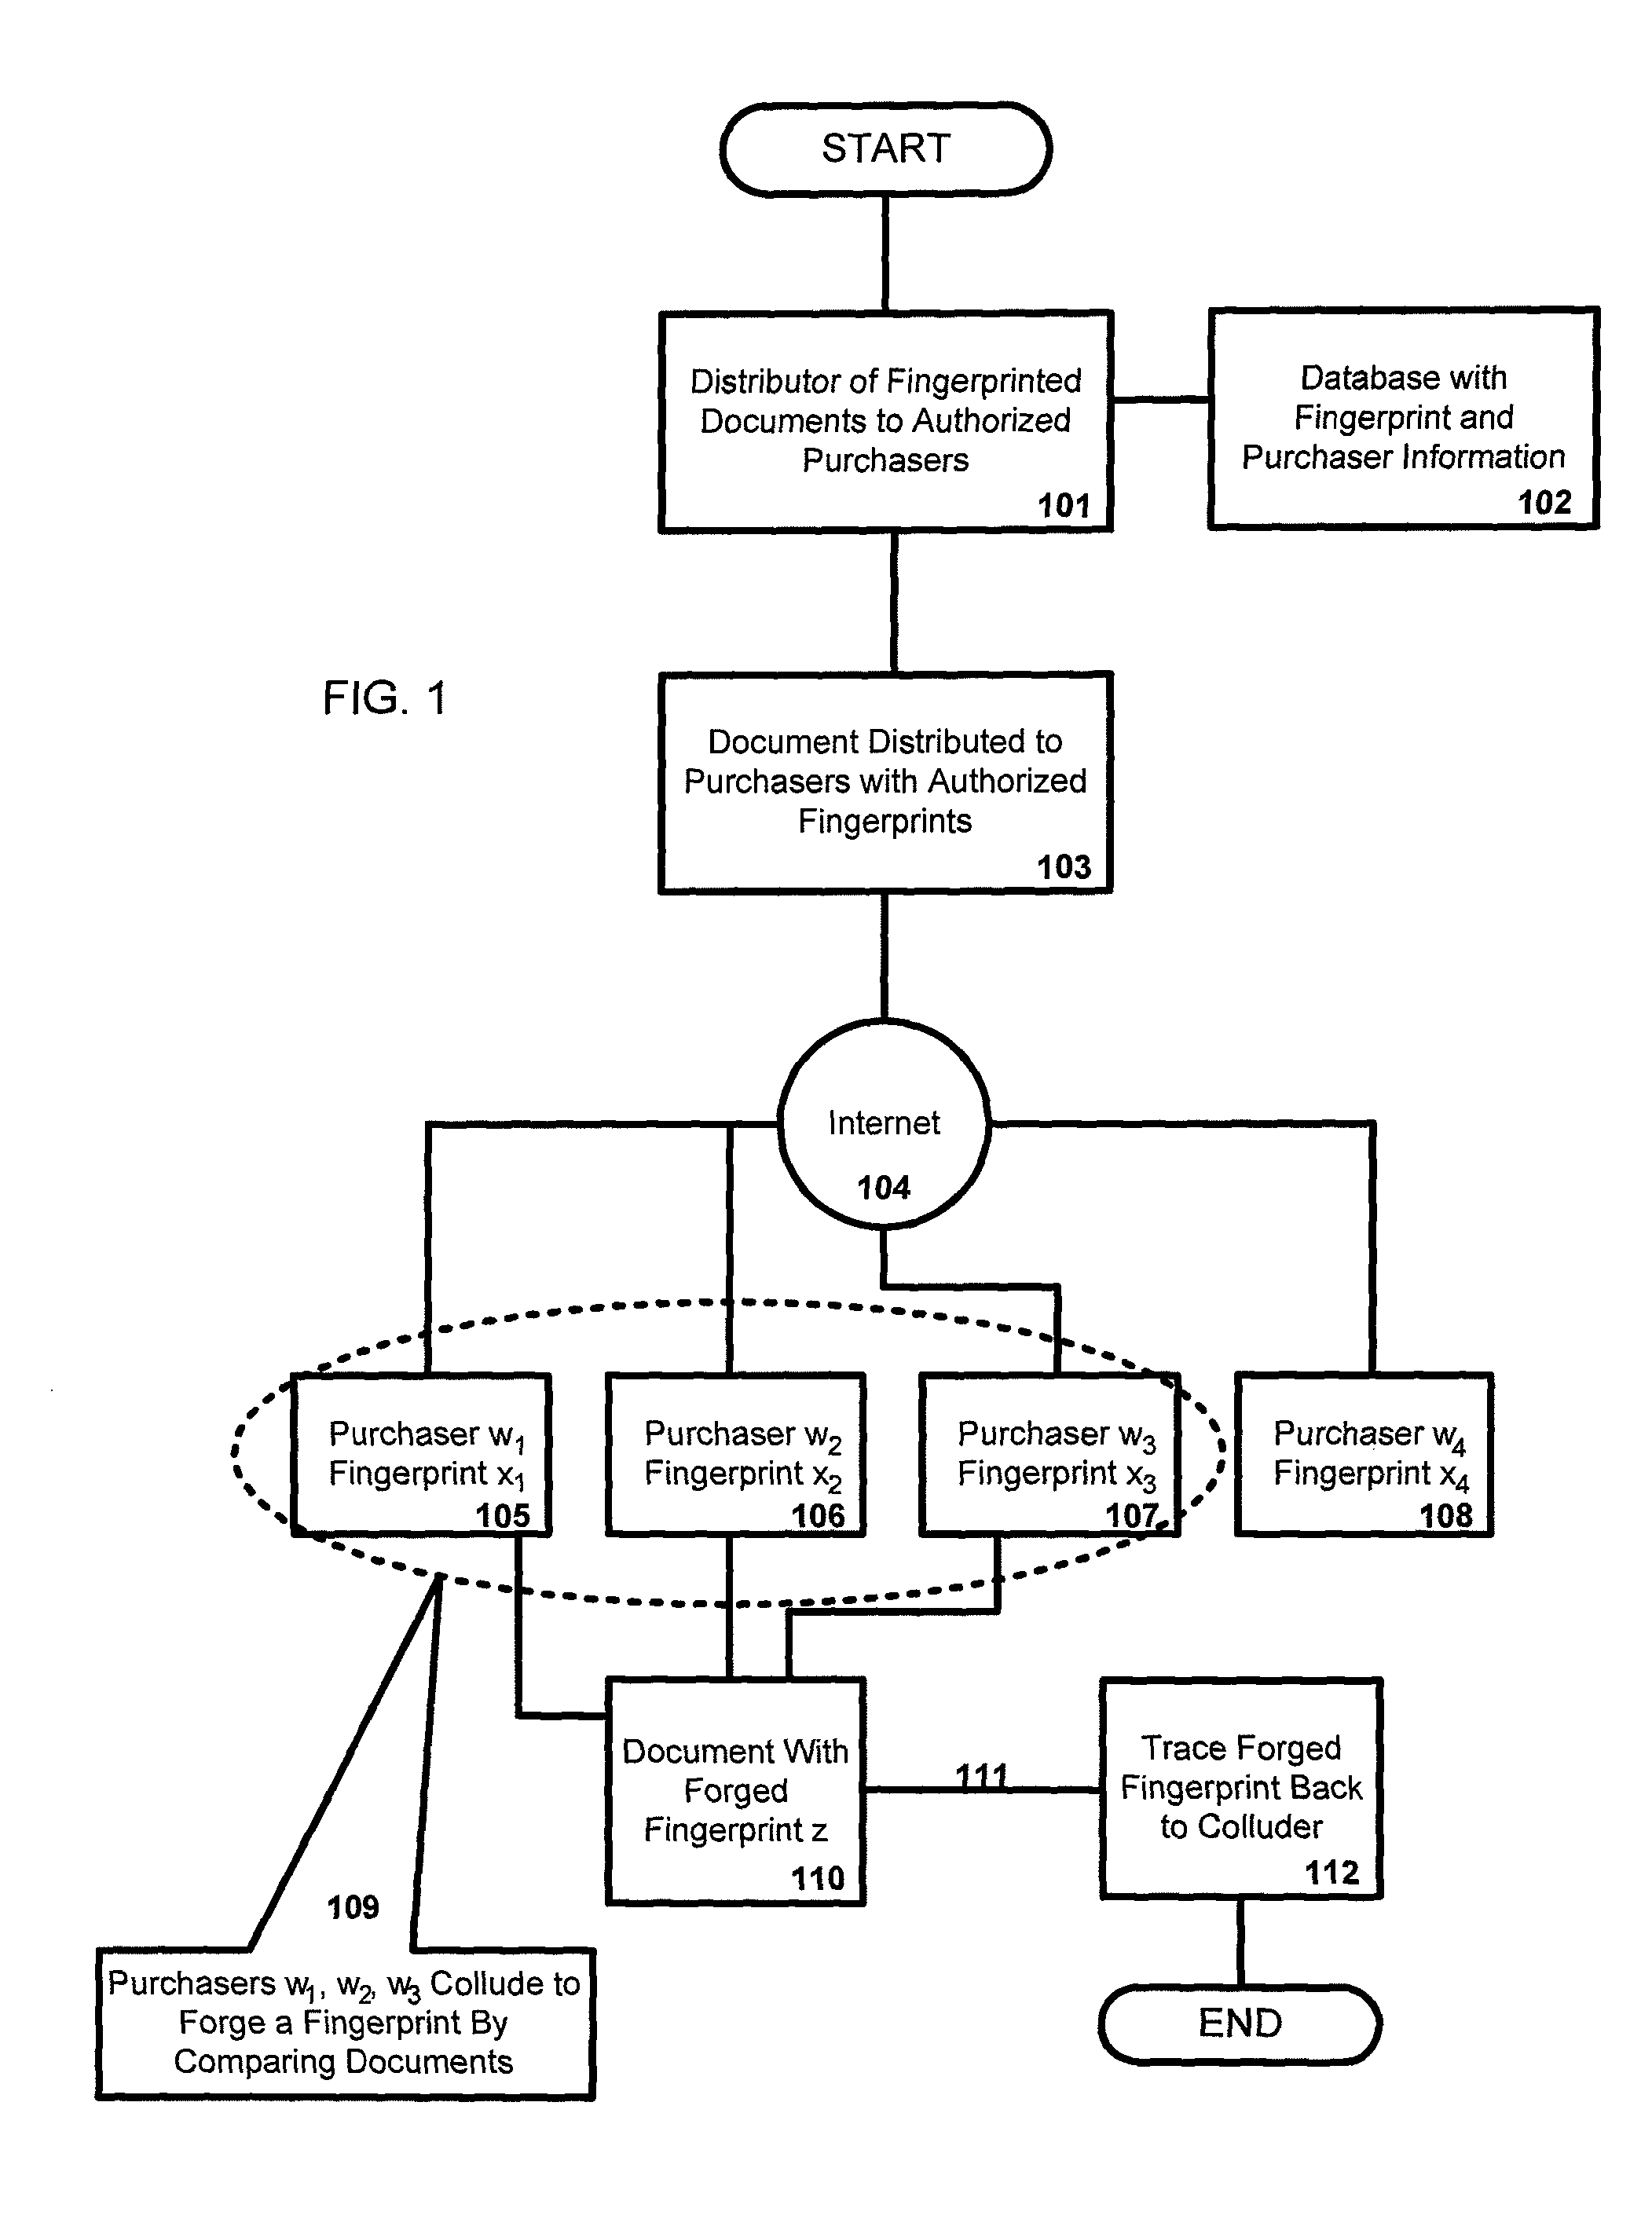 Method and system for generating and using digital fingerprints for electronic documents